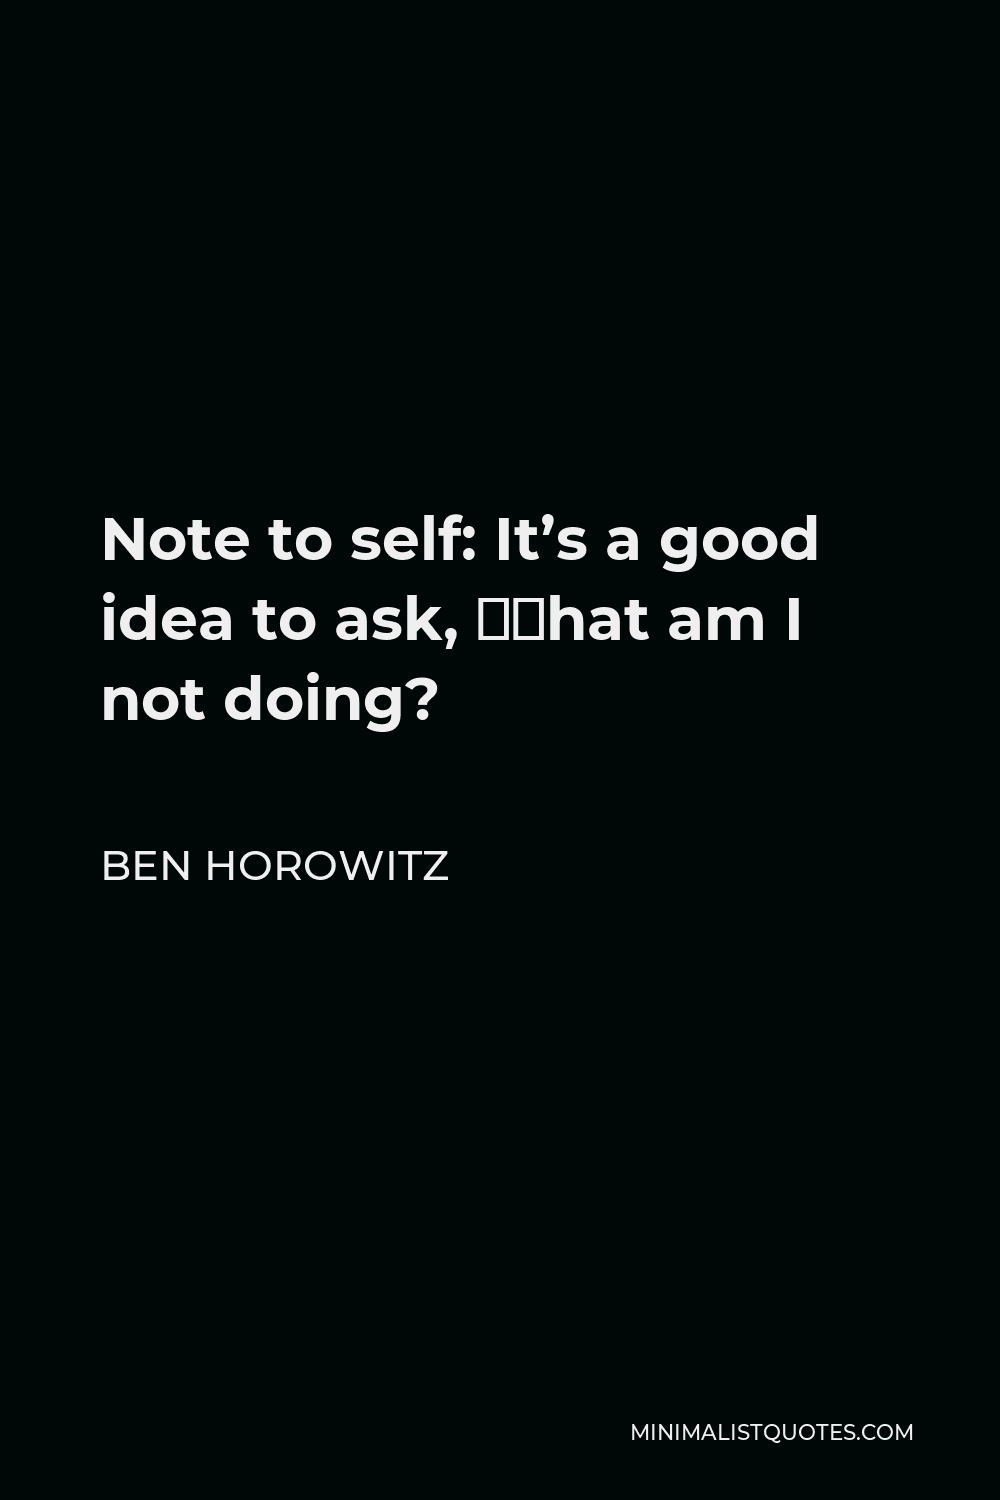 Ben Horowitz Quote - Note to self: It’s a good idea to ask, “What am I not doing?